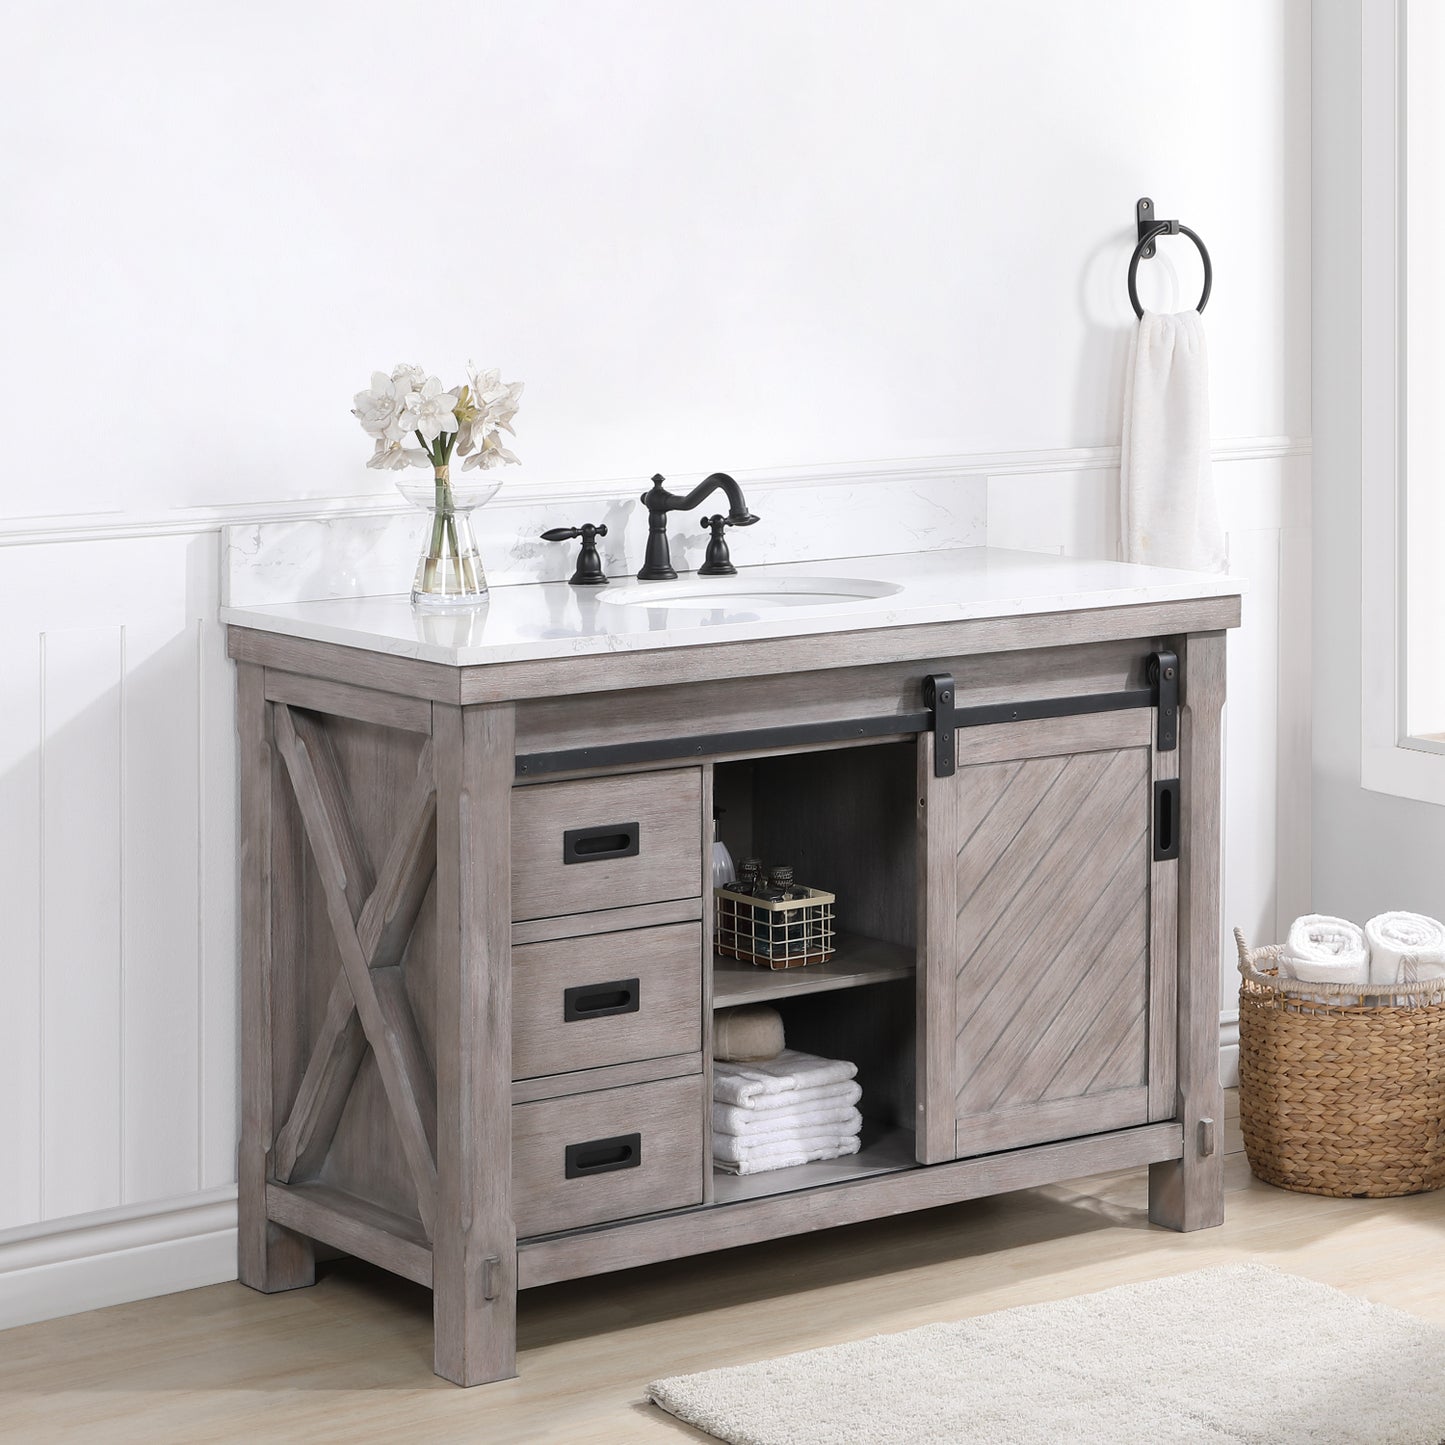 Cortes 48" Single Sink Bath Vanity in Classical Grey with White Composite Countertop